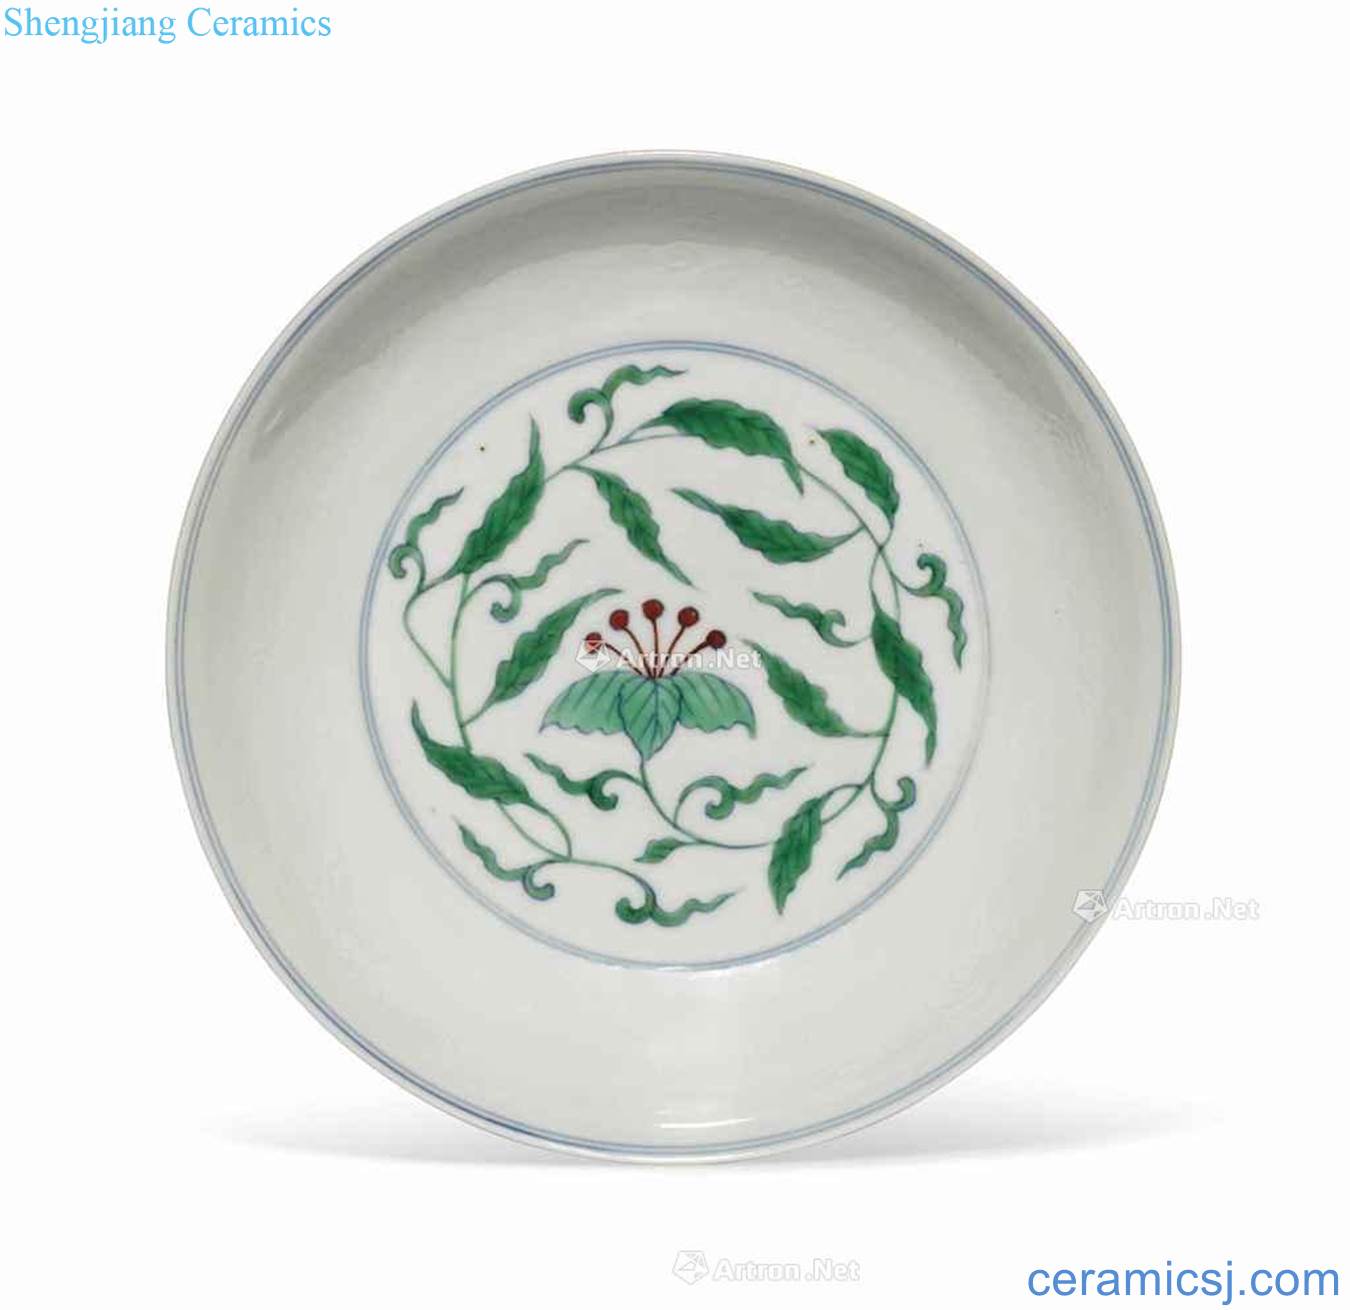 In the 18th century A DOUCAI AND ANHUA - DECORATED SAUCER DISH